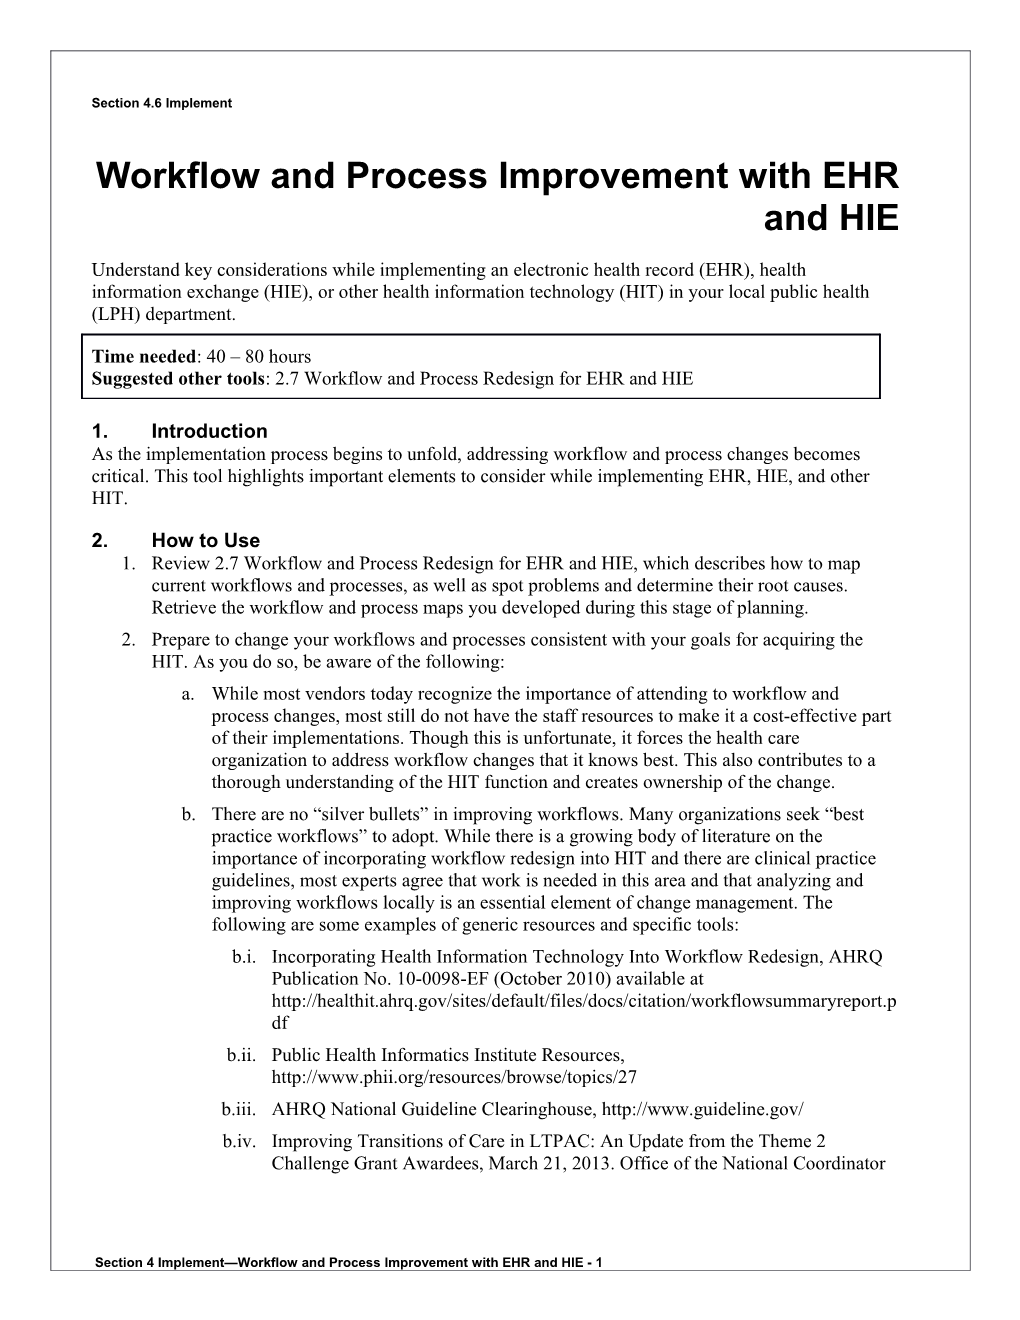 4 Workflow and Process Improvement with EHR and HIE